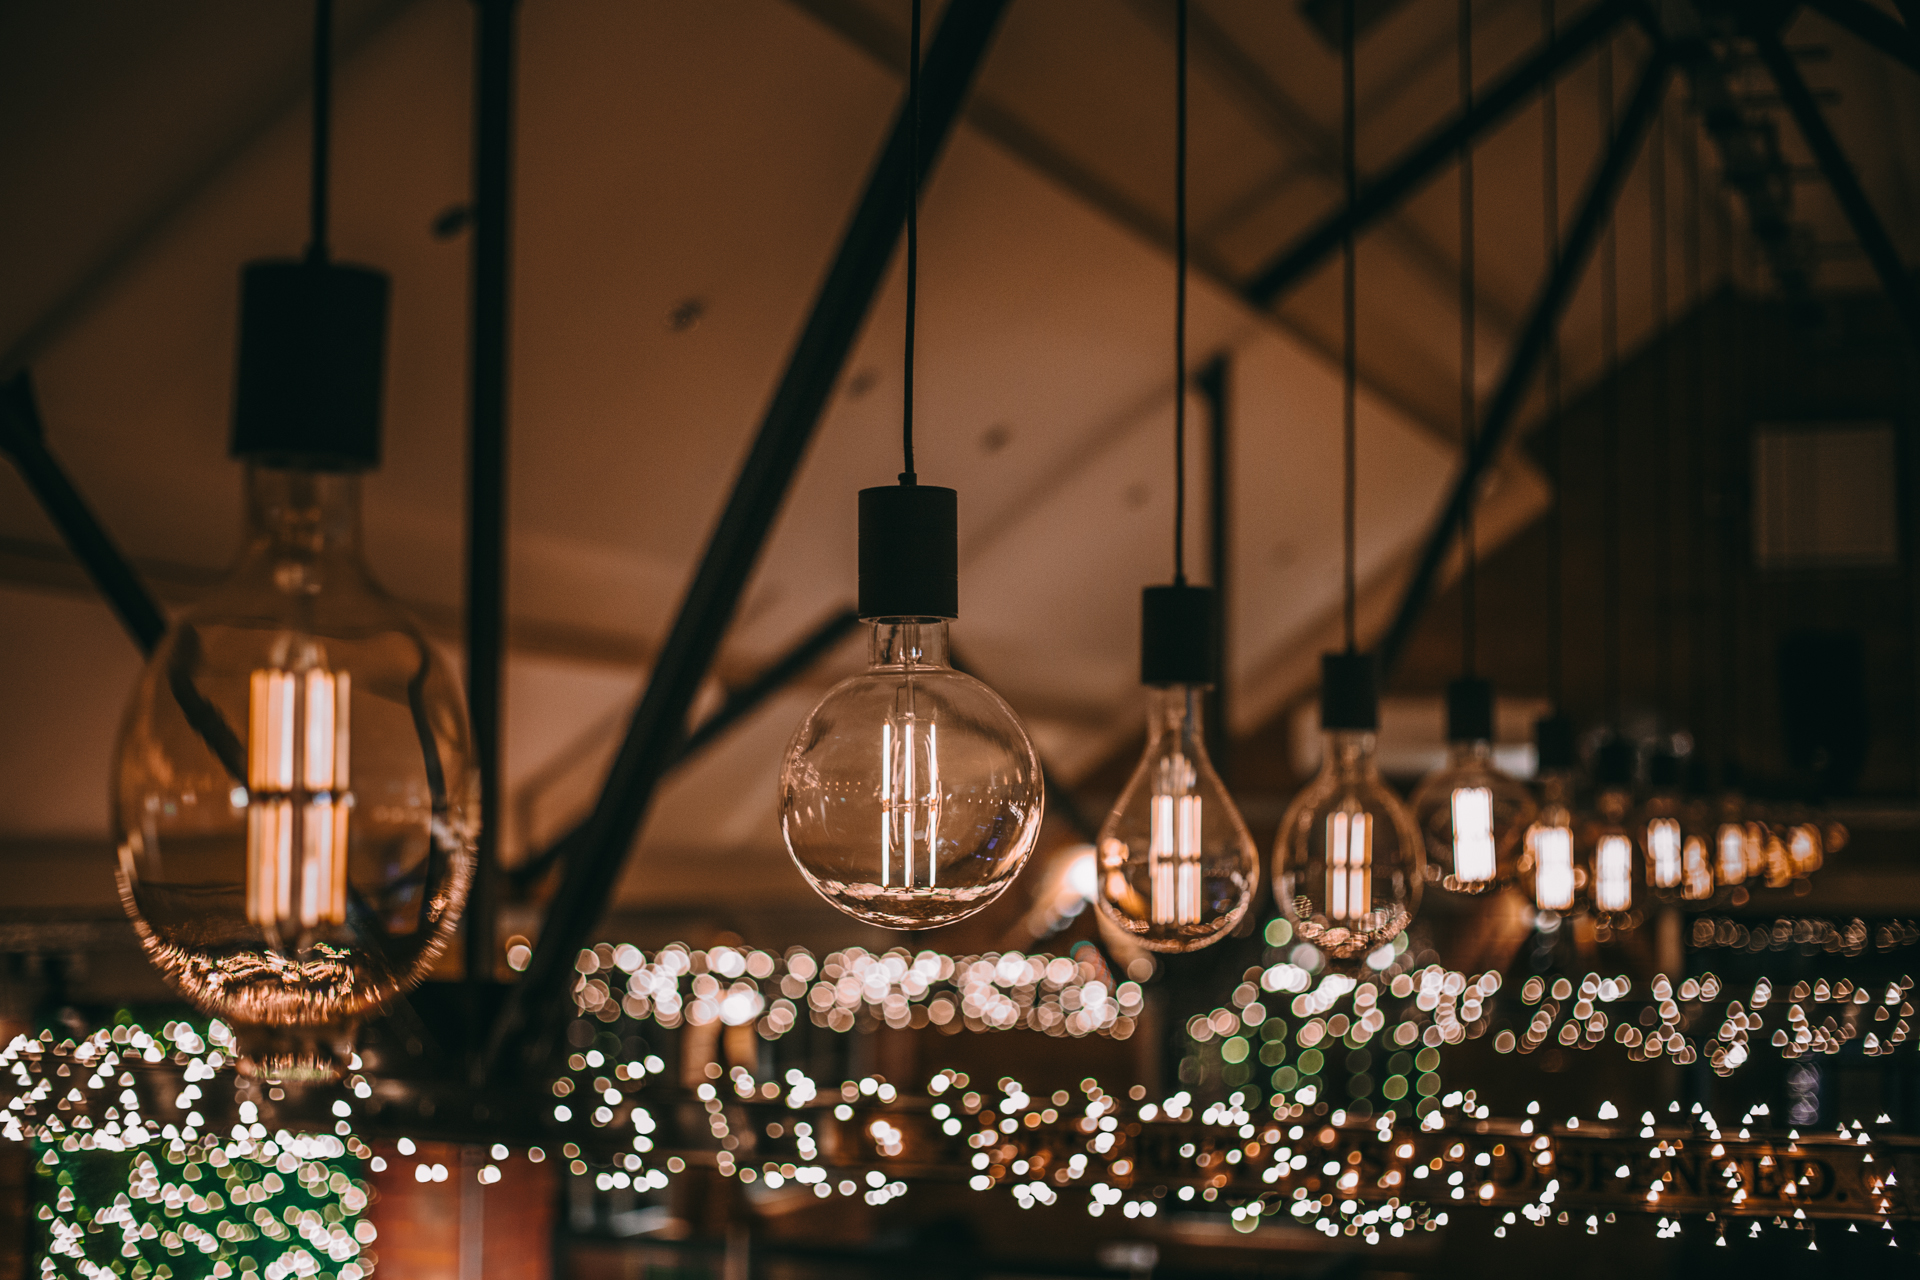 Immersed in a glow of dutch filament bulbs and fairy lights